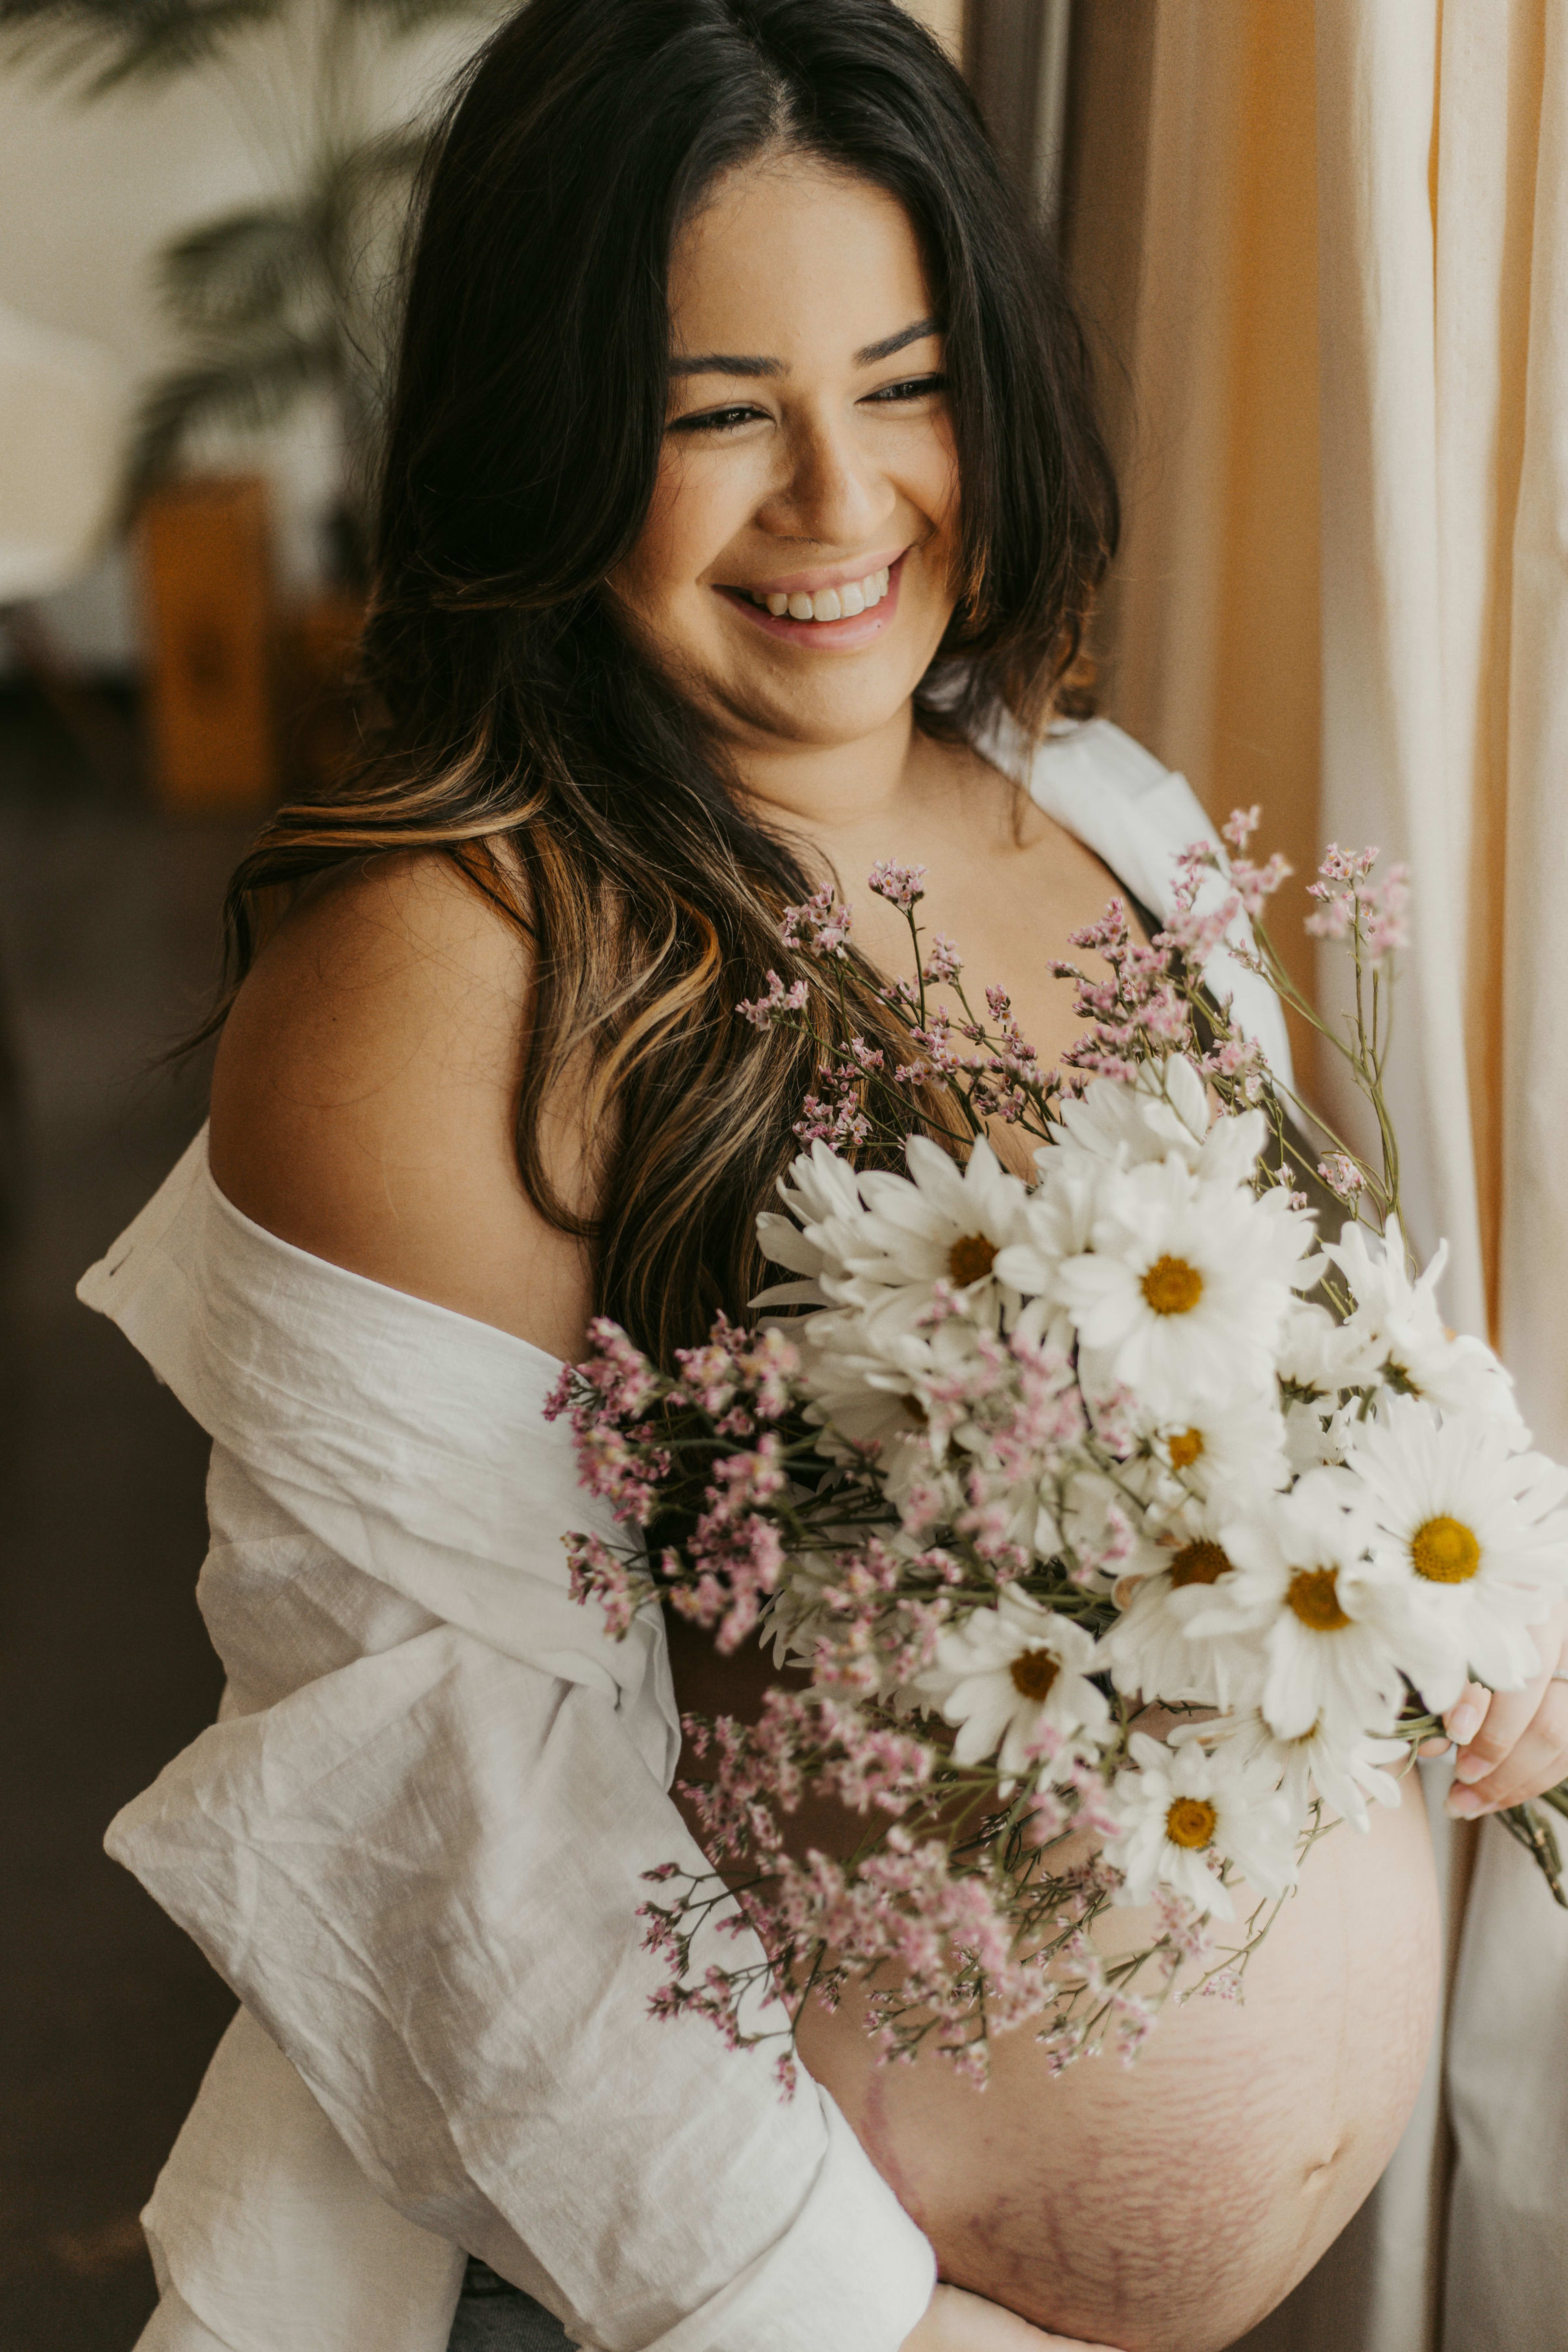 A white maternity photo shoot featuring a pregnant woman holding a bouquet of flowers.